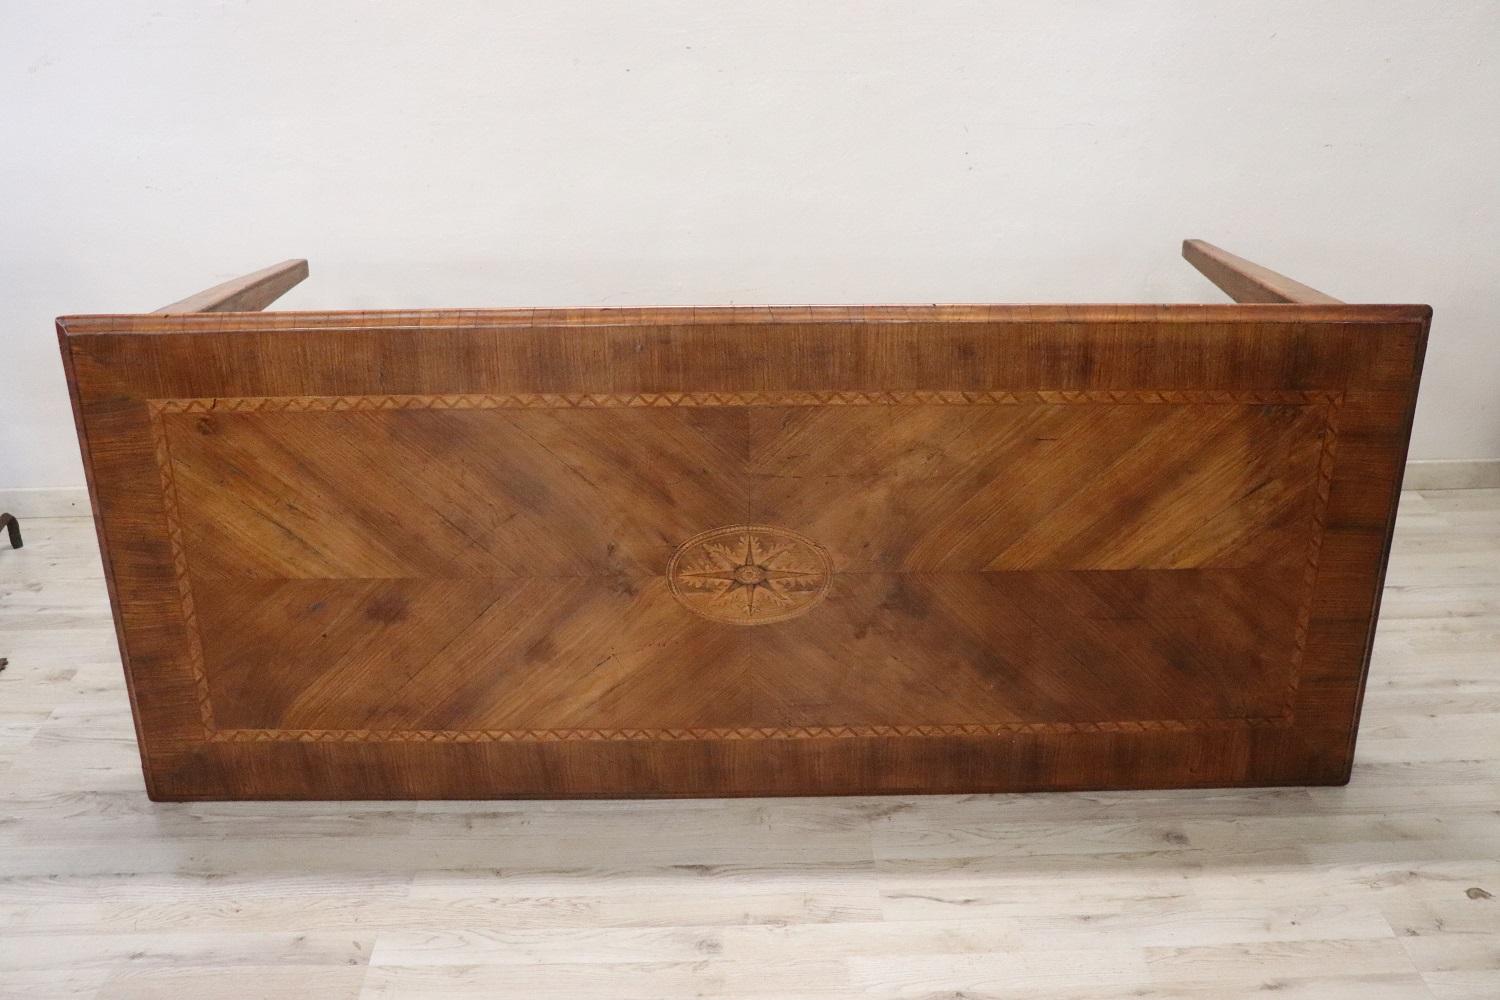 Italian Rare 19th Century Louis XVI Style Inlaid Walnut Antique Long Dining Room Table For Sale